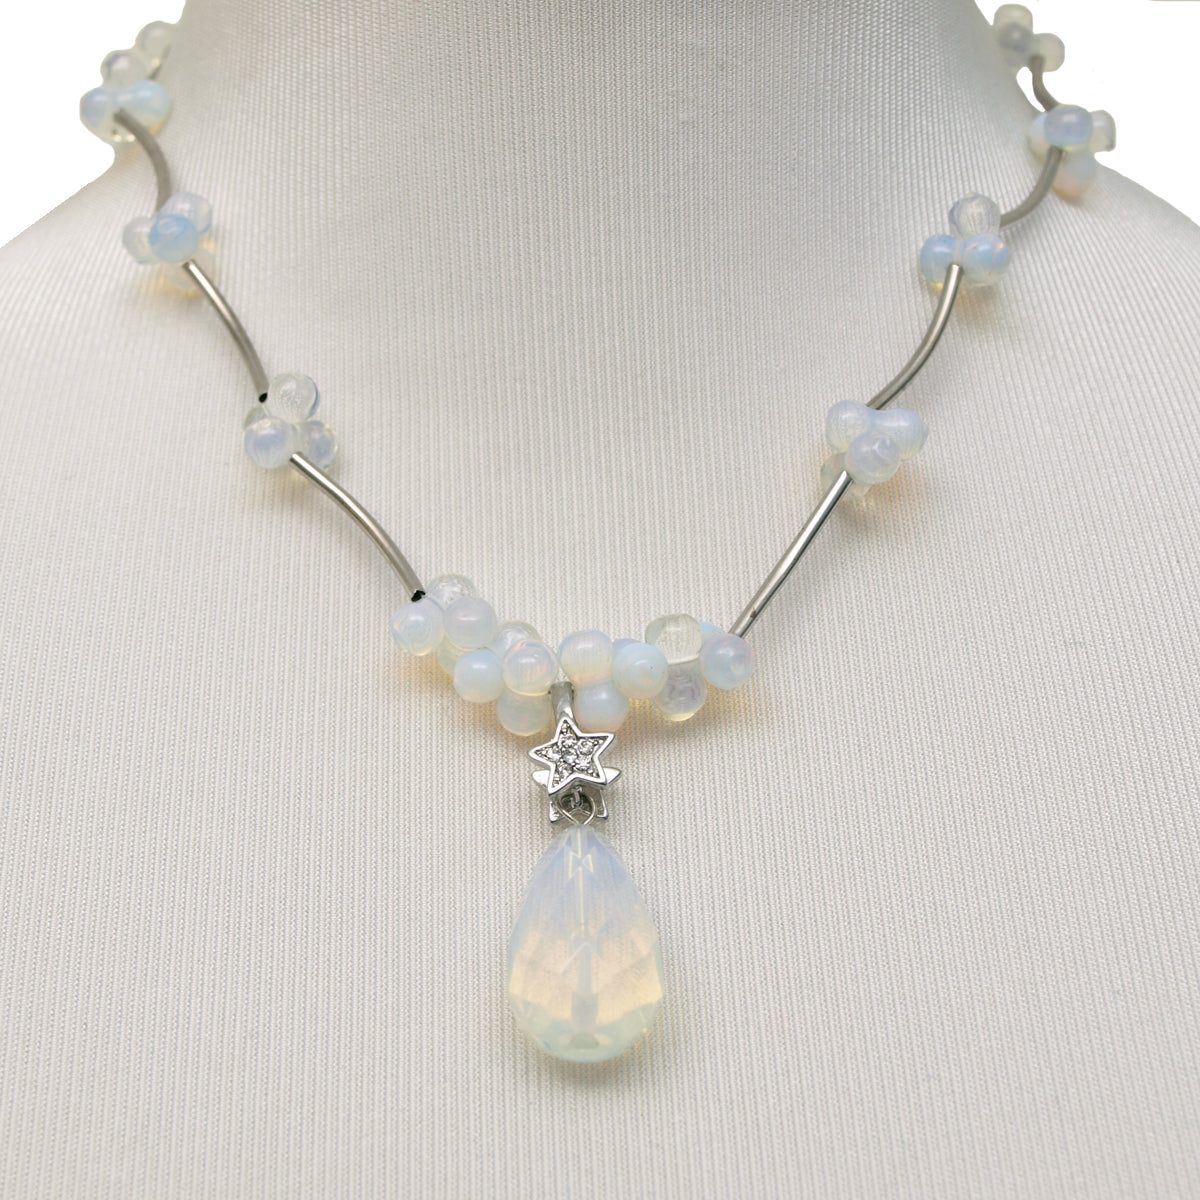 Opal Clusters with Teardrop Pendant Necklace, 17 inches